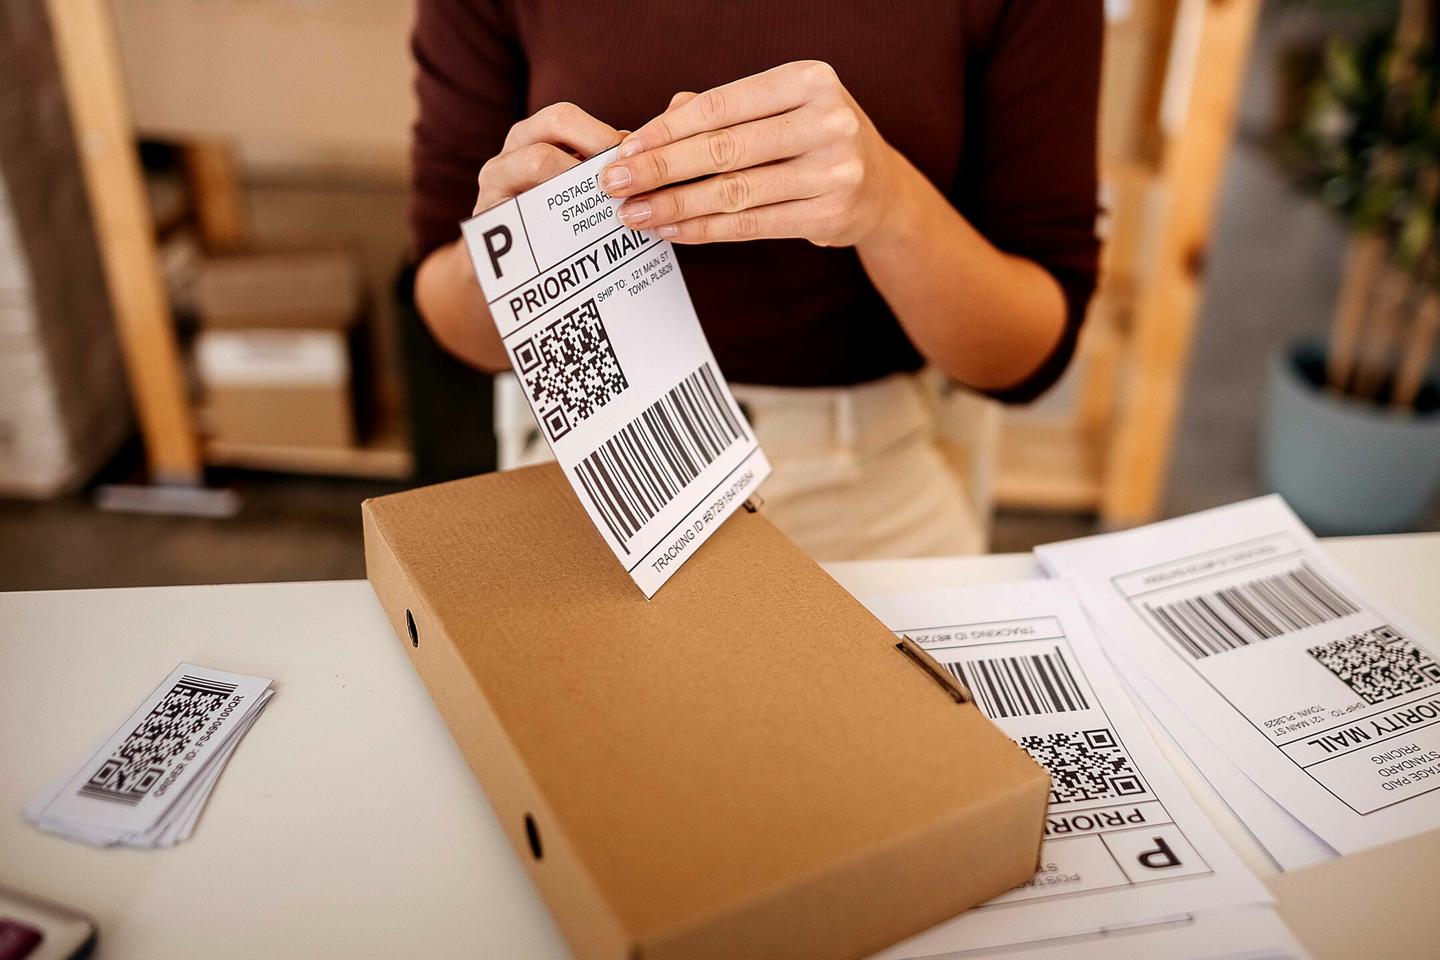 A woman placing a shipping label on a box